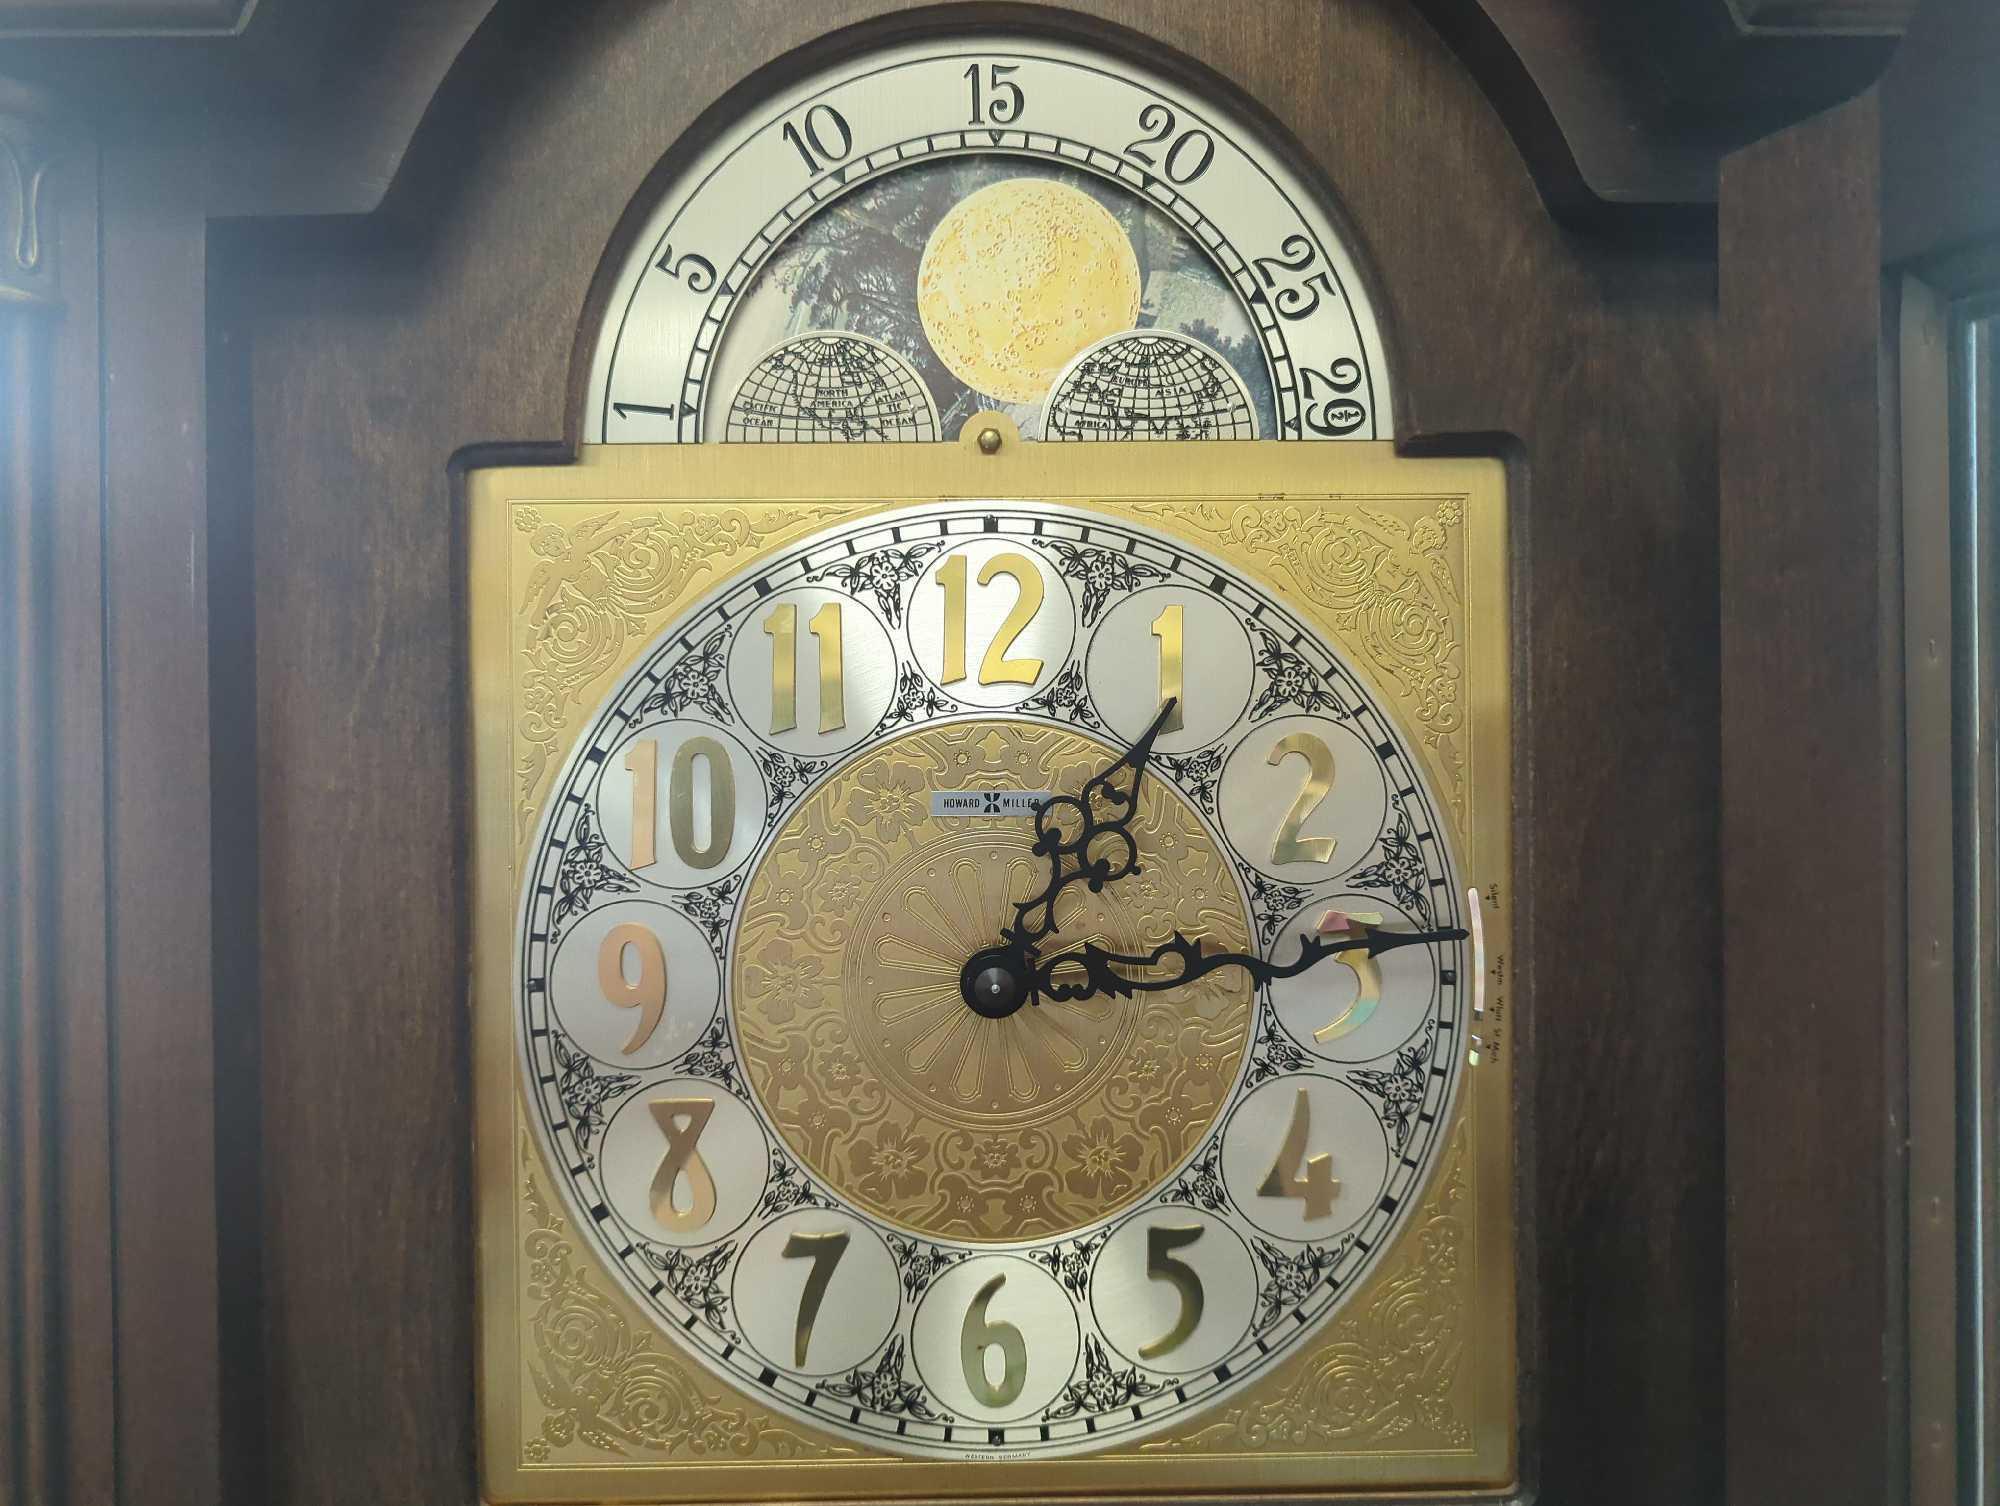 Howard Miller Grandfather Clock Model KGS542, With Beveled Glass, Has Main Parts, Measure